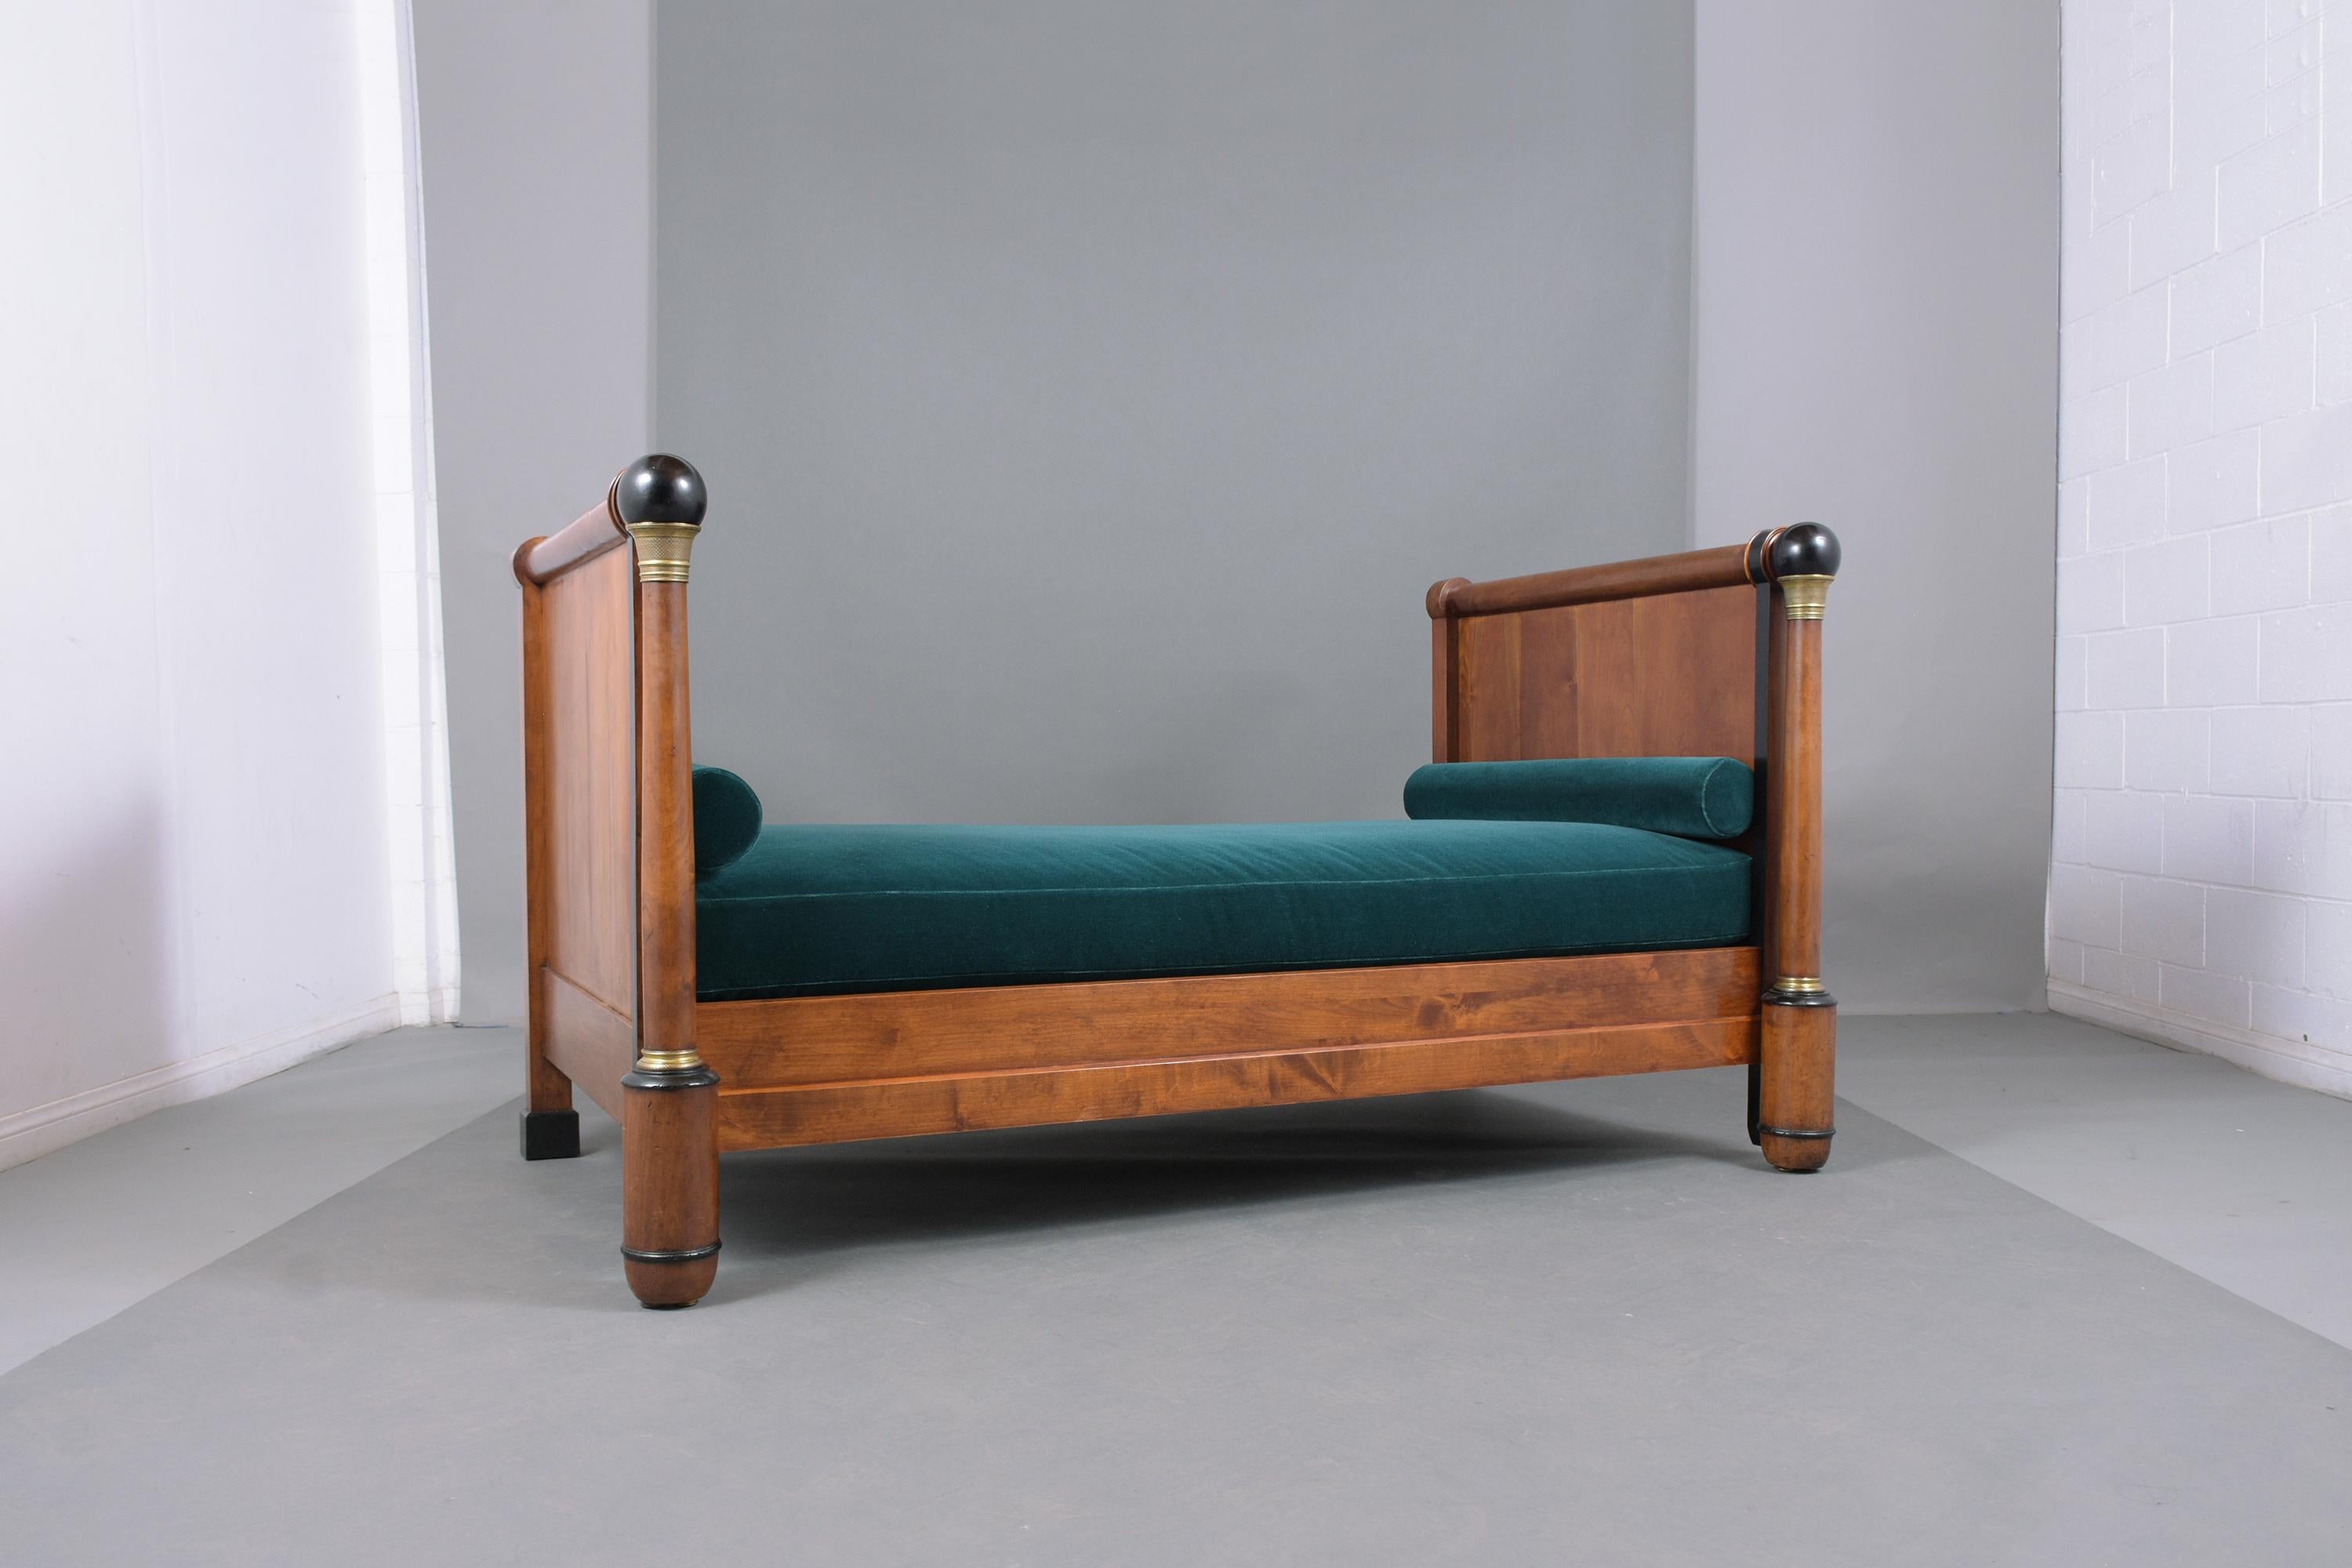 An extraordinary mid-19th century Empire daybed hand-crafted out of walnut wood and been professionally restored by our team of in-house craftsmen. This elegant daybed features straight headboard front columns with bronze ornaments, and molding